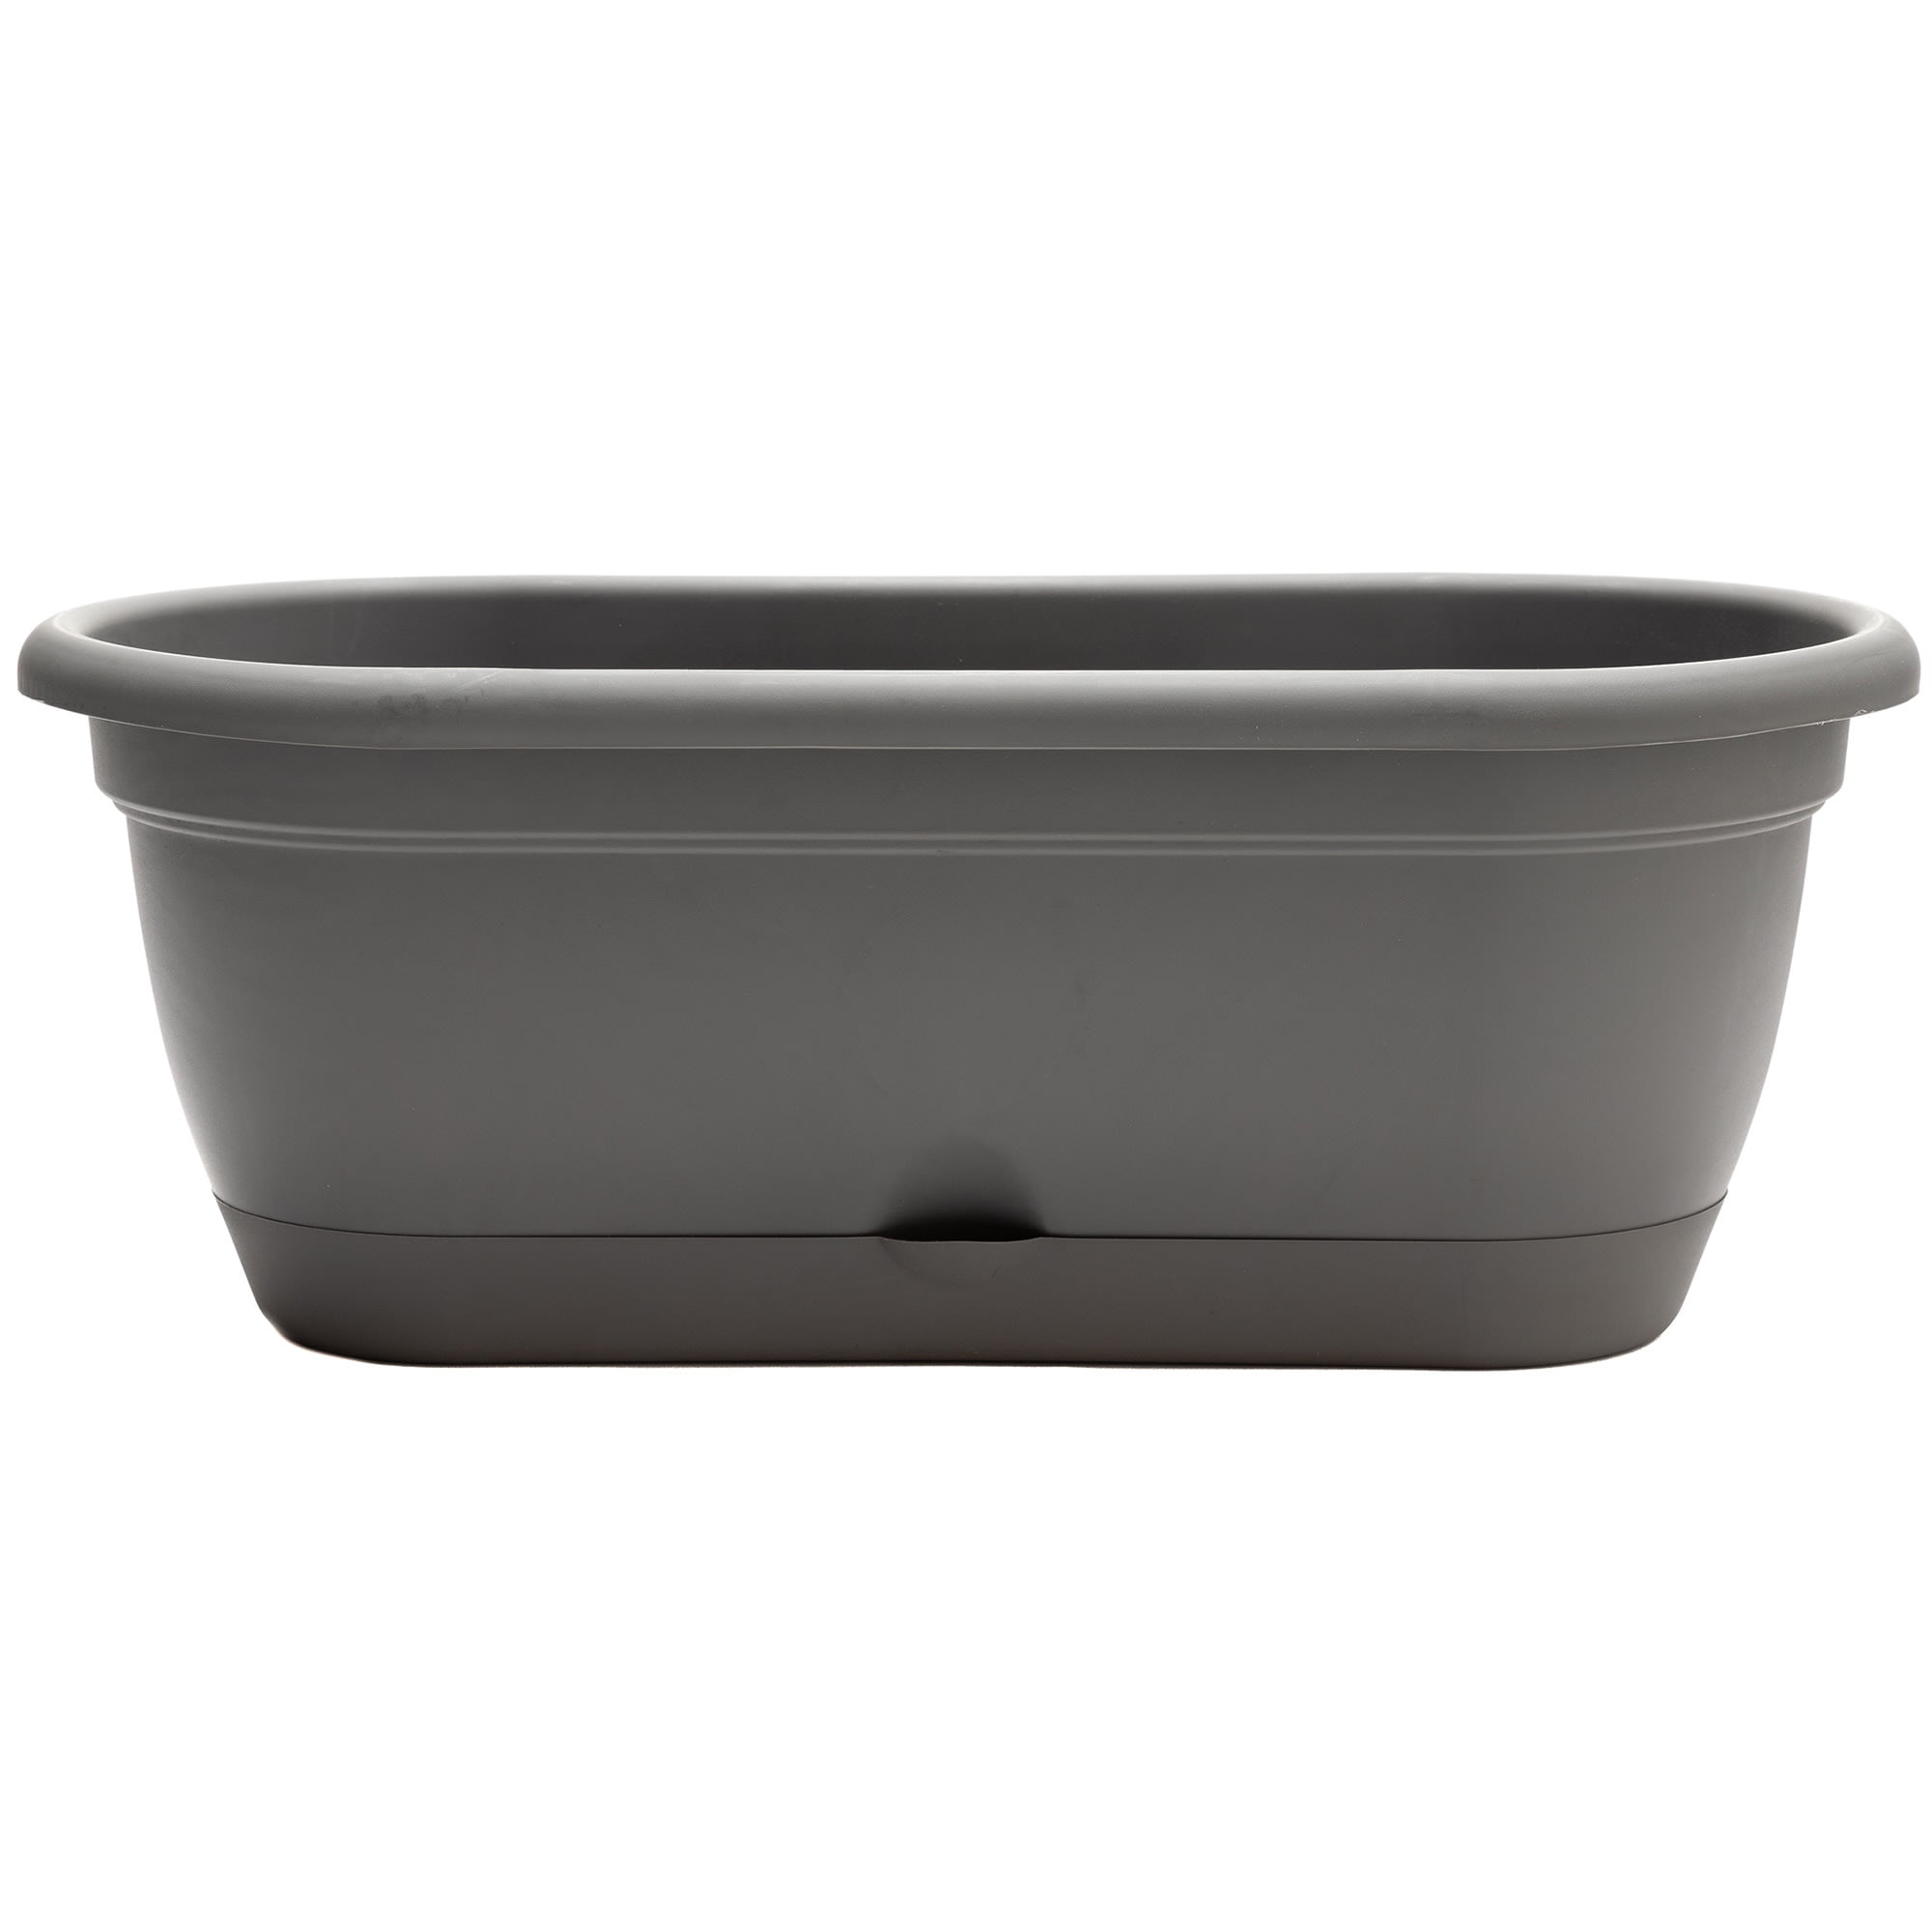 Lwb18908 18 In. Lucca Self Watering Window Box Planter With Saucer, Charcoal